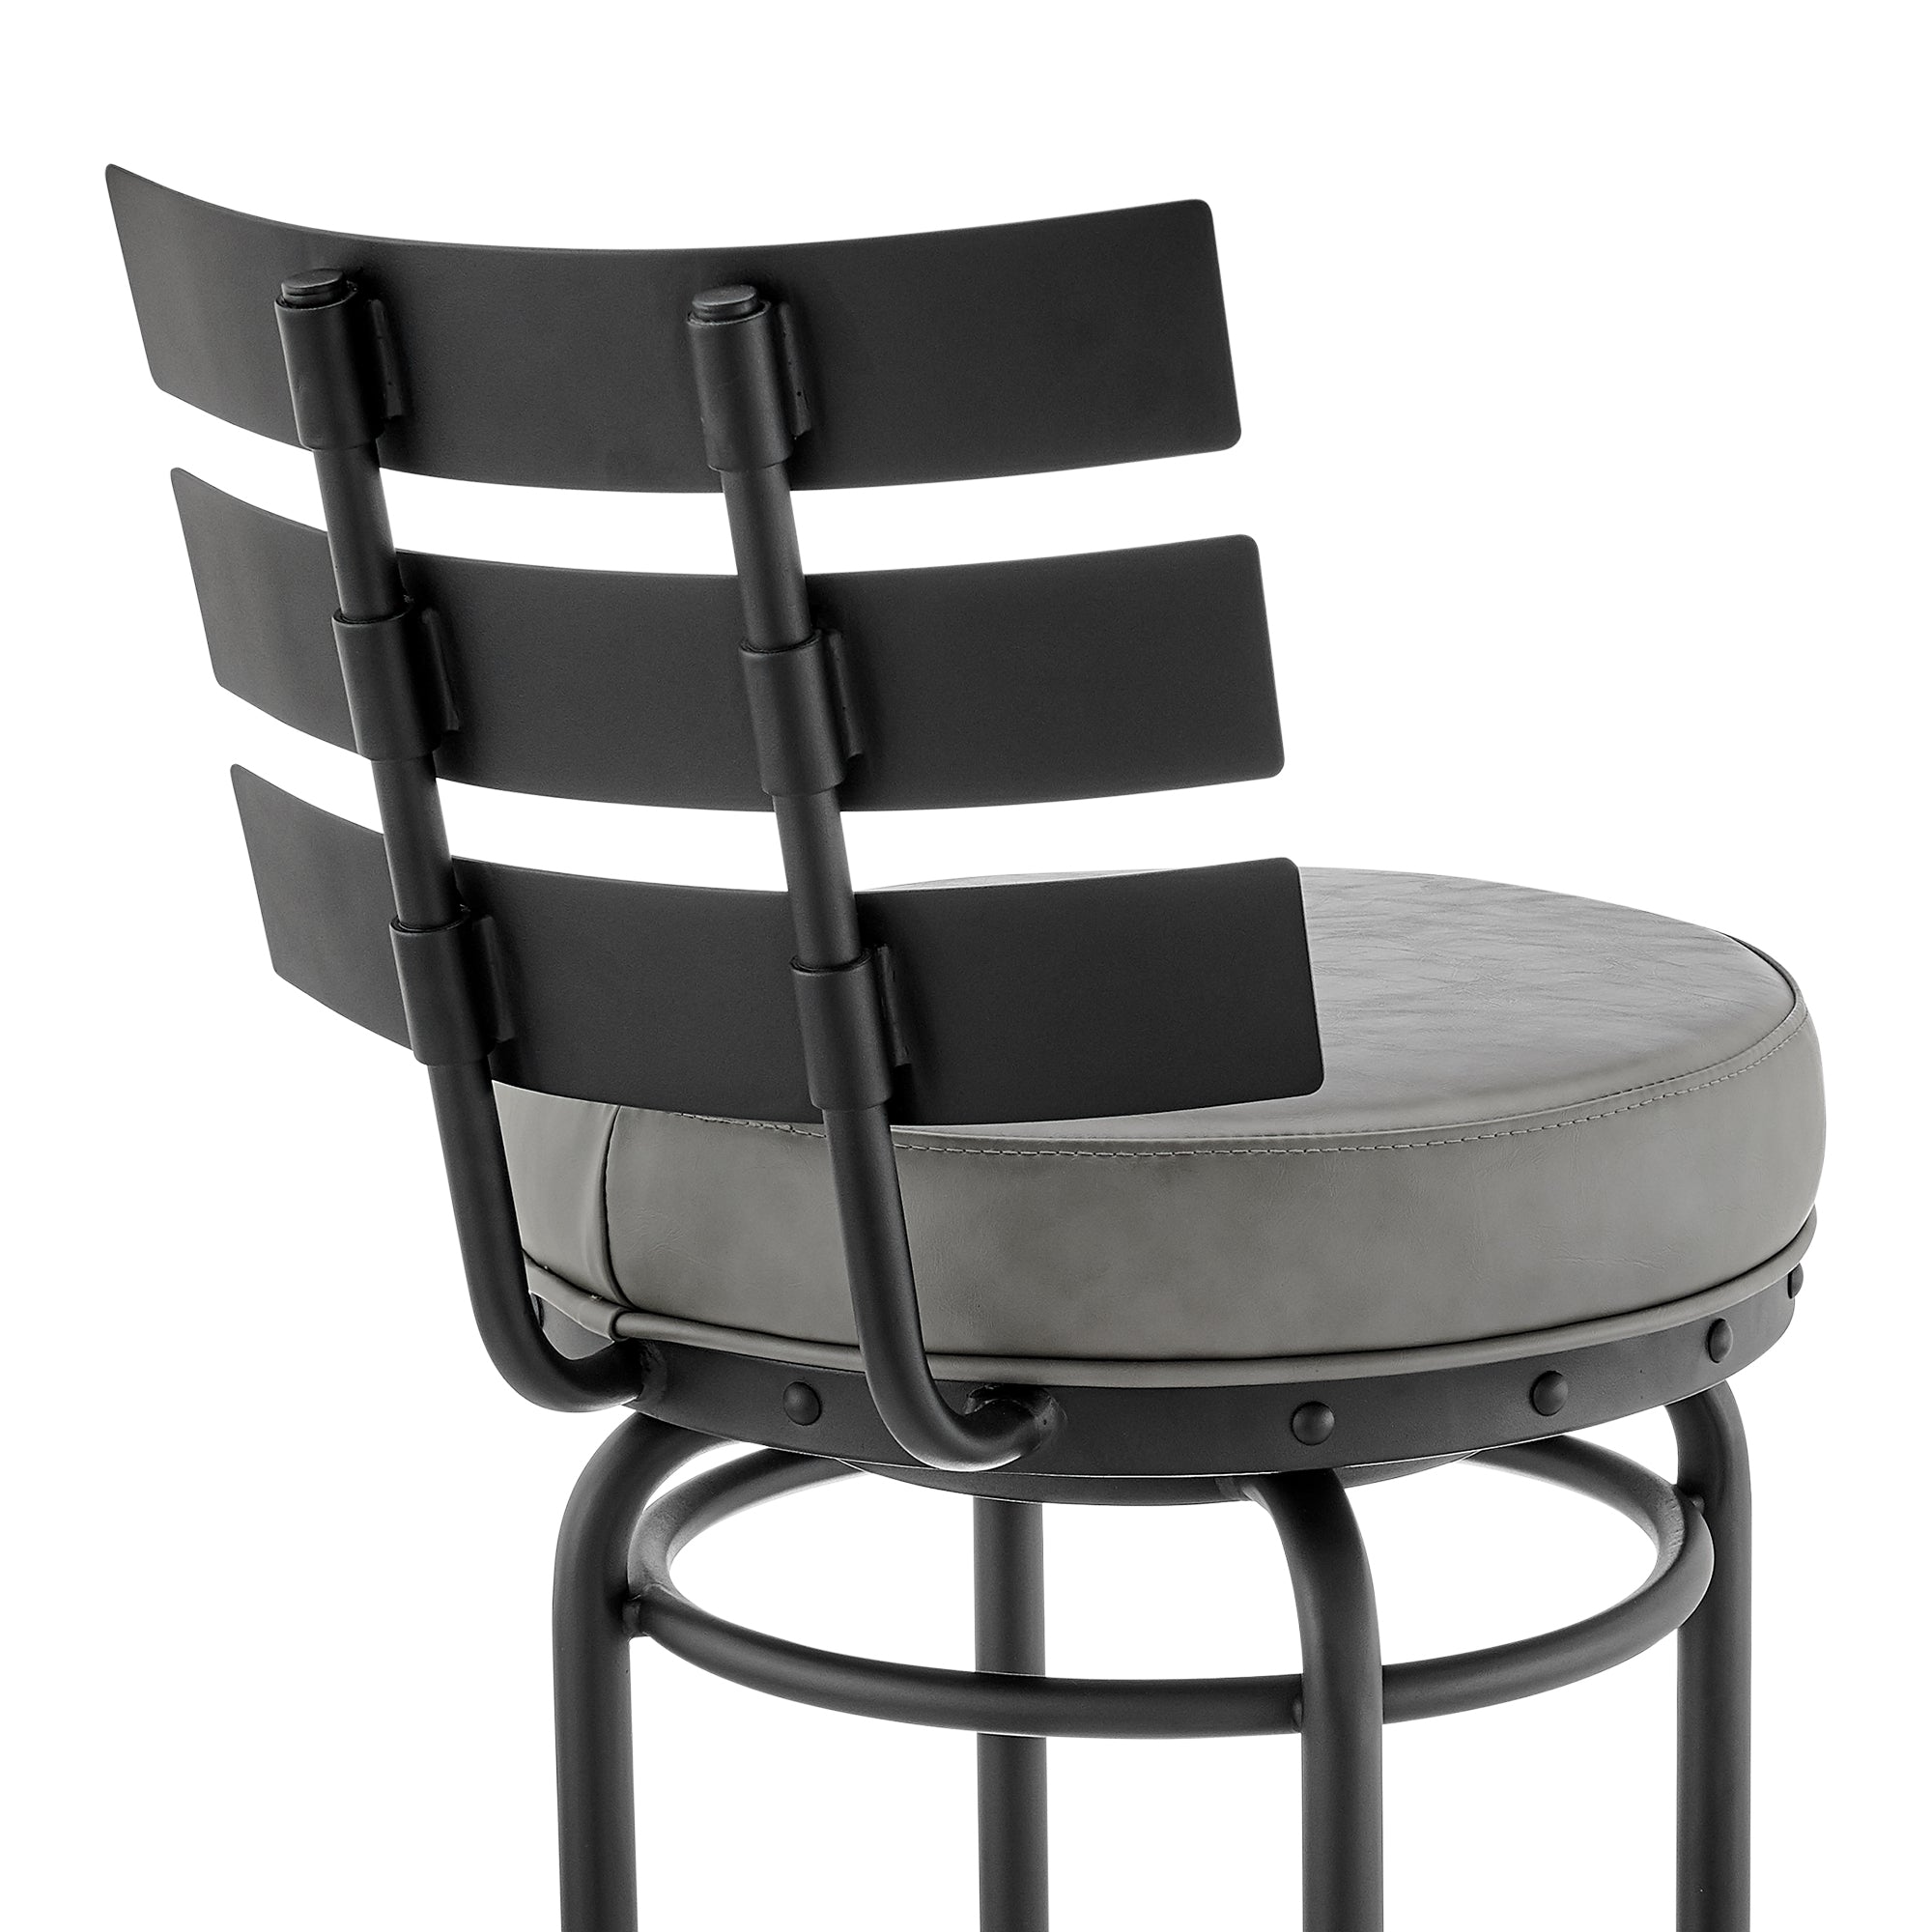 Armen Living - Natya Swivel Counter or Bar Stool in Metal with Faux Leather - 840254333642